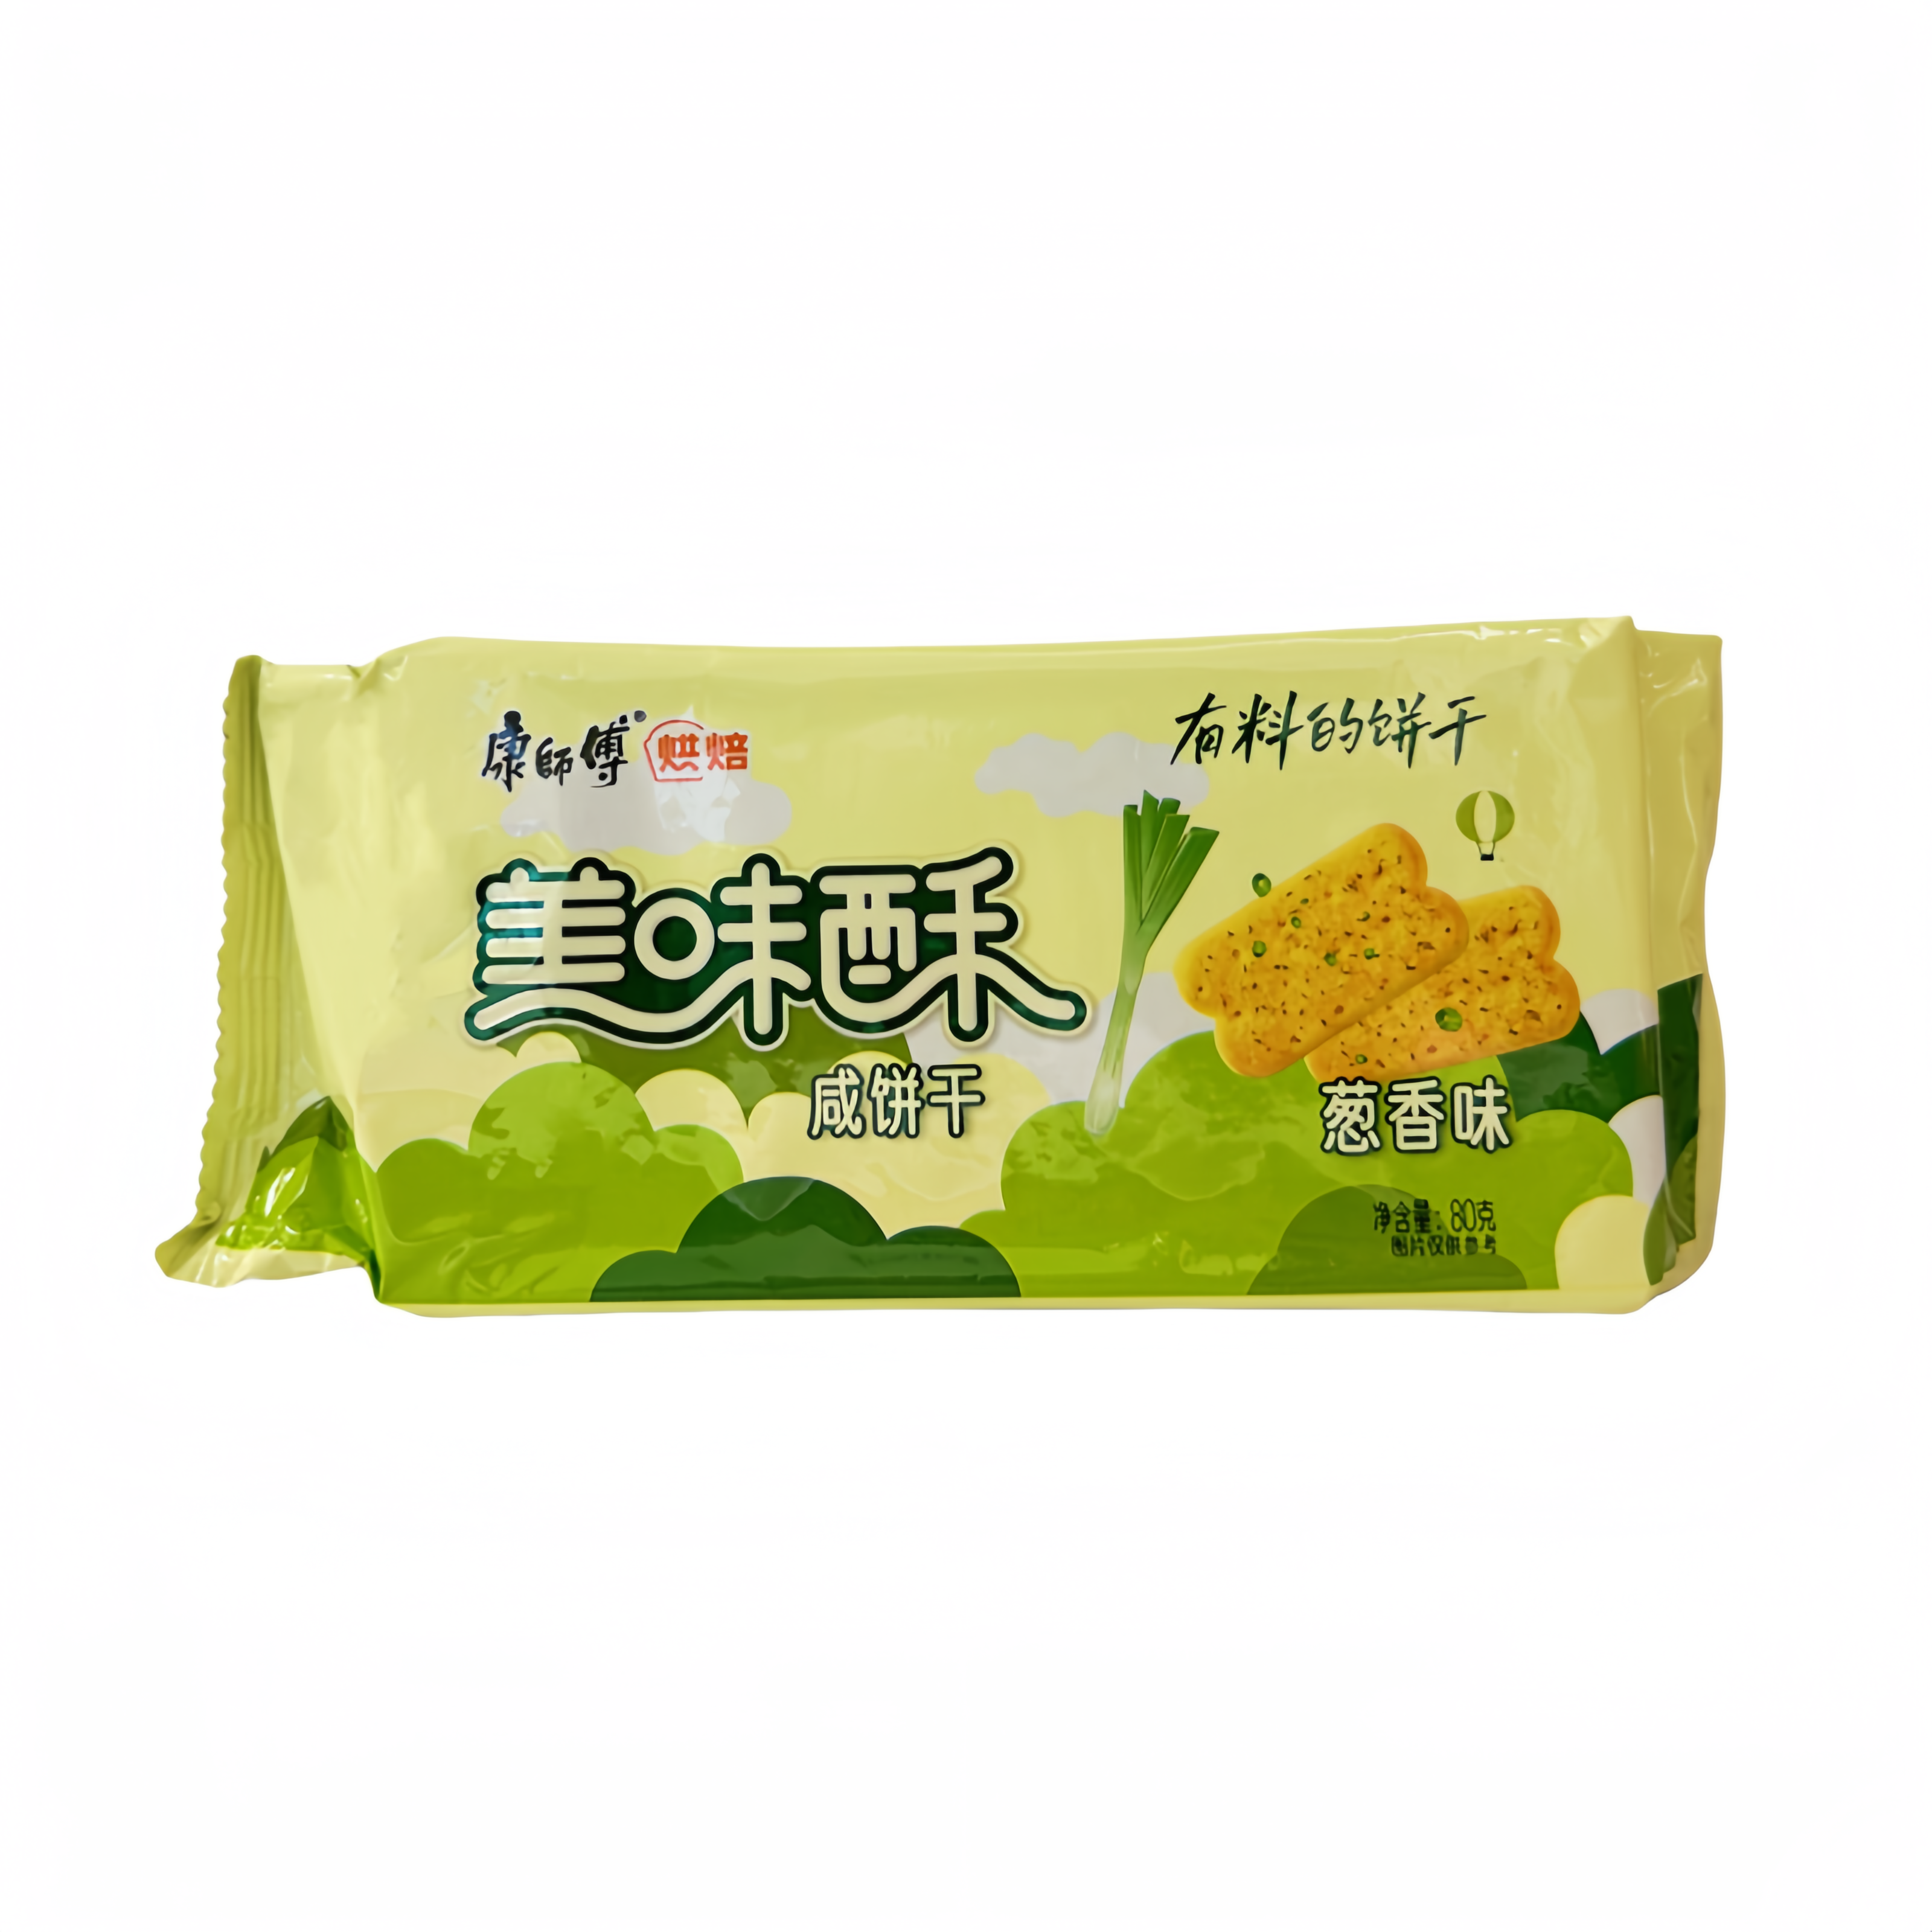 Cakes With Green Onion Flavor 80g KSF China